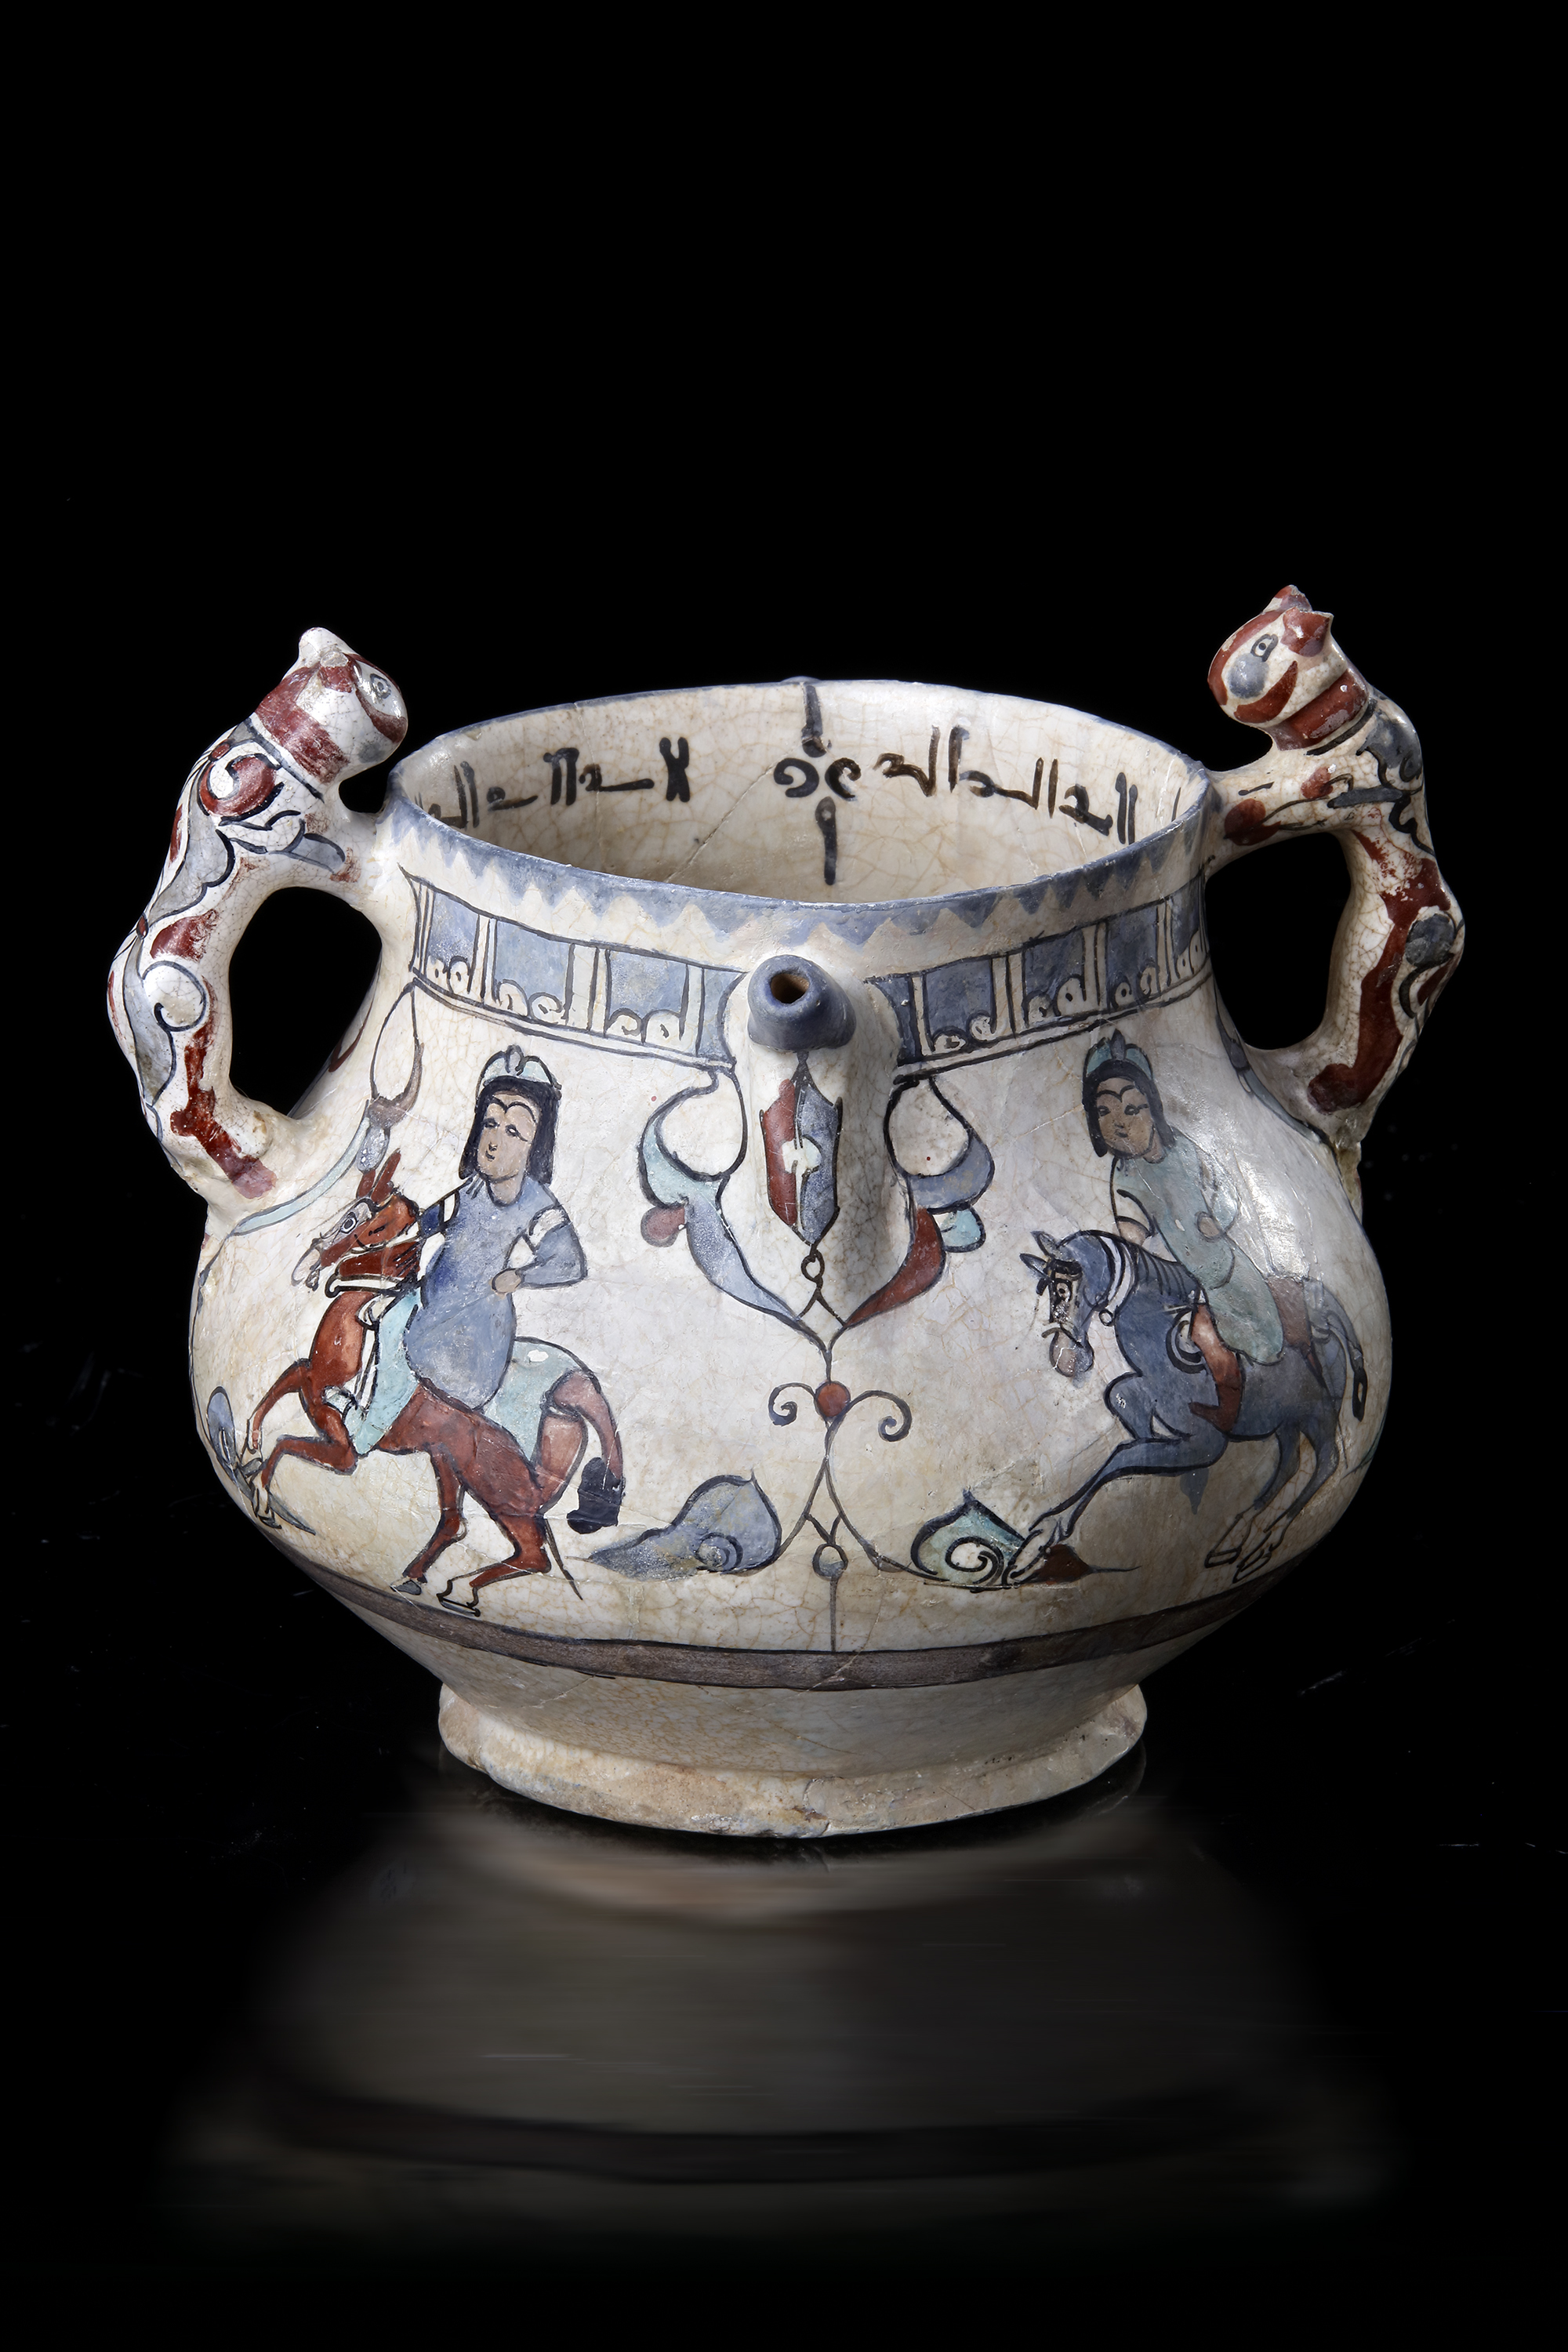 AN ISLAMIC VASE WITH ZOOMORPHIC HANDLES, PERSIA, KASHAN, LATE 12TH-EARLY 13TH CENTURY